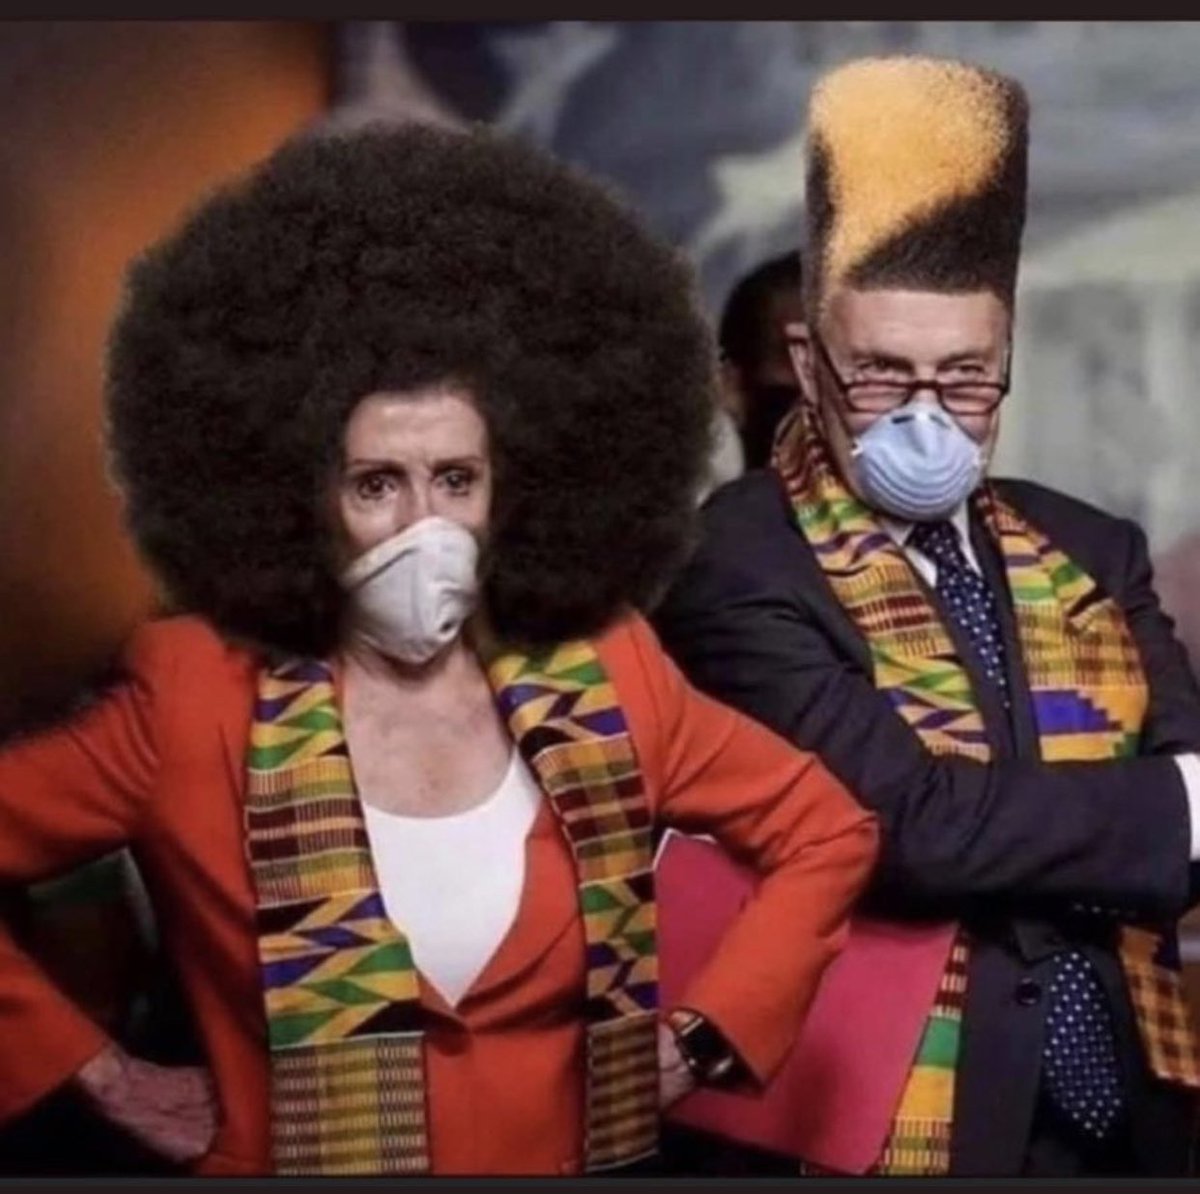 Democrats in fear of me waking up Black voters came up with a new recruitment pander poster. Aunt Nancy and Uncle Chuck wants you! If you don’t vote democrat you ain’t black! @SpeakerPelosi & @SenSchumer @DNC @GeorgiaDemocrat @JoeBiden @GaRepublicans @GOP